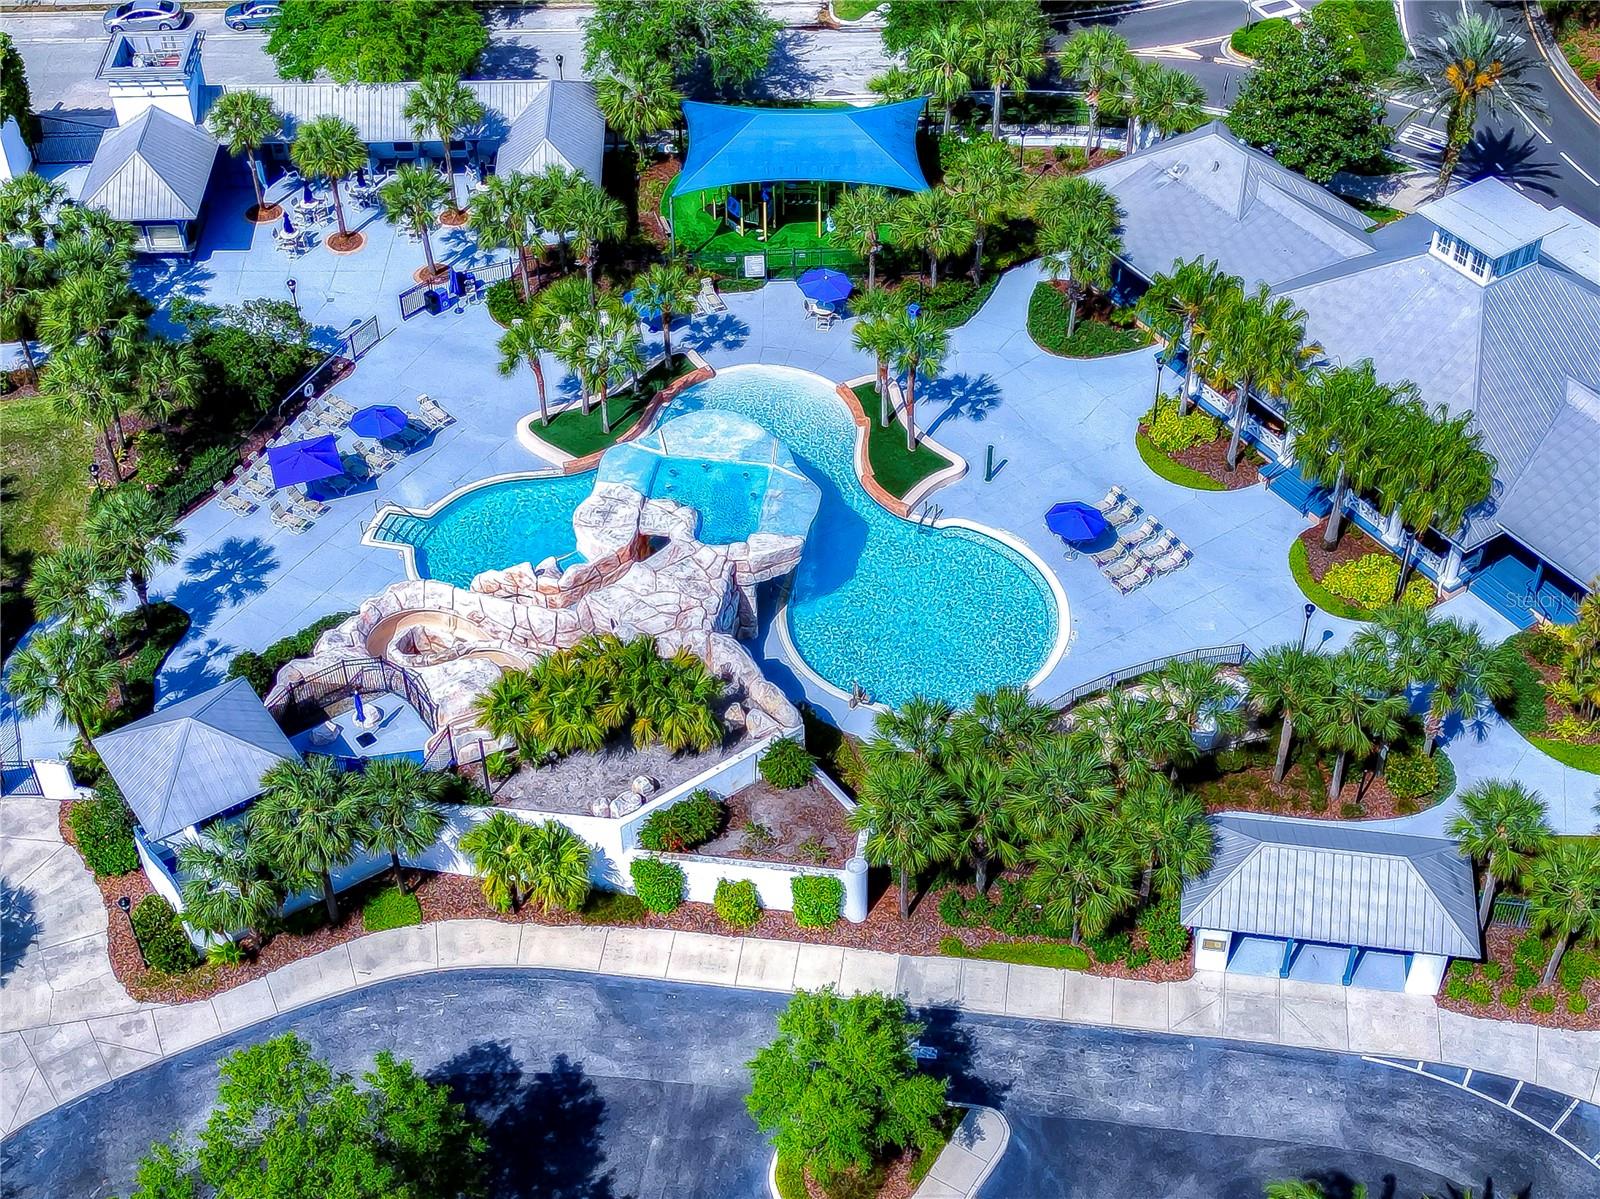 award-winning community in the heart of Lithia with resort-style amenities!